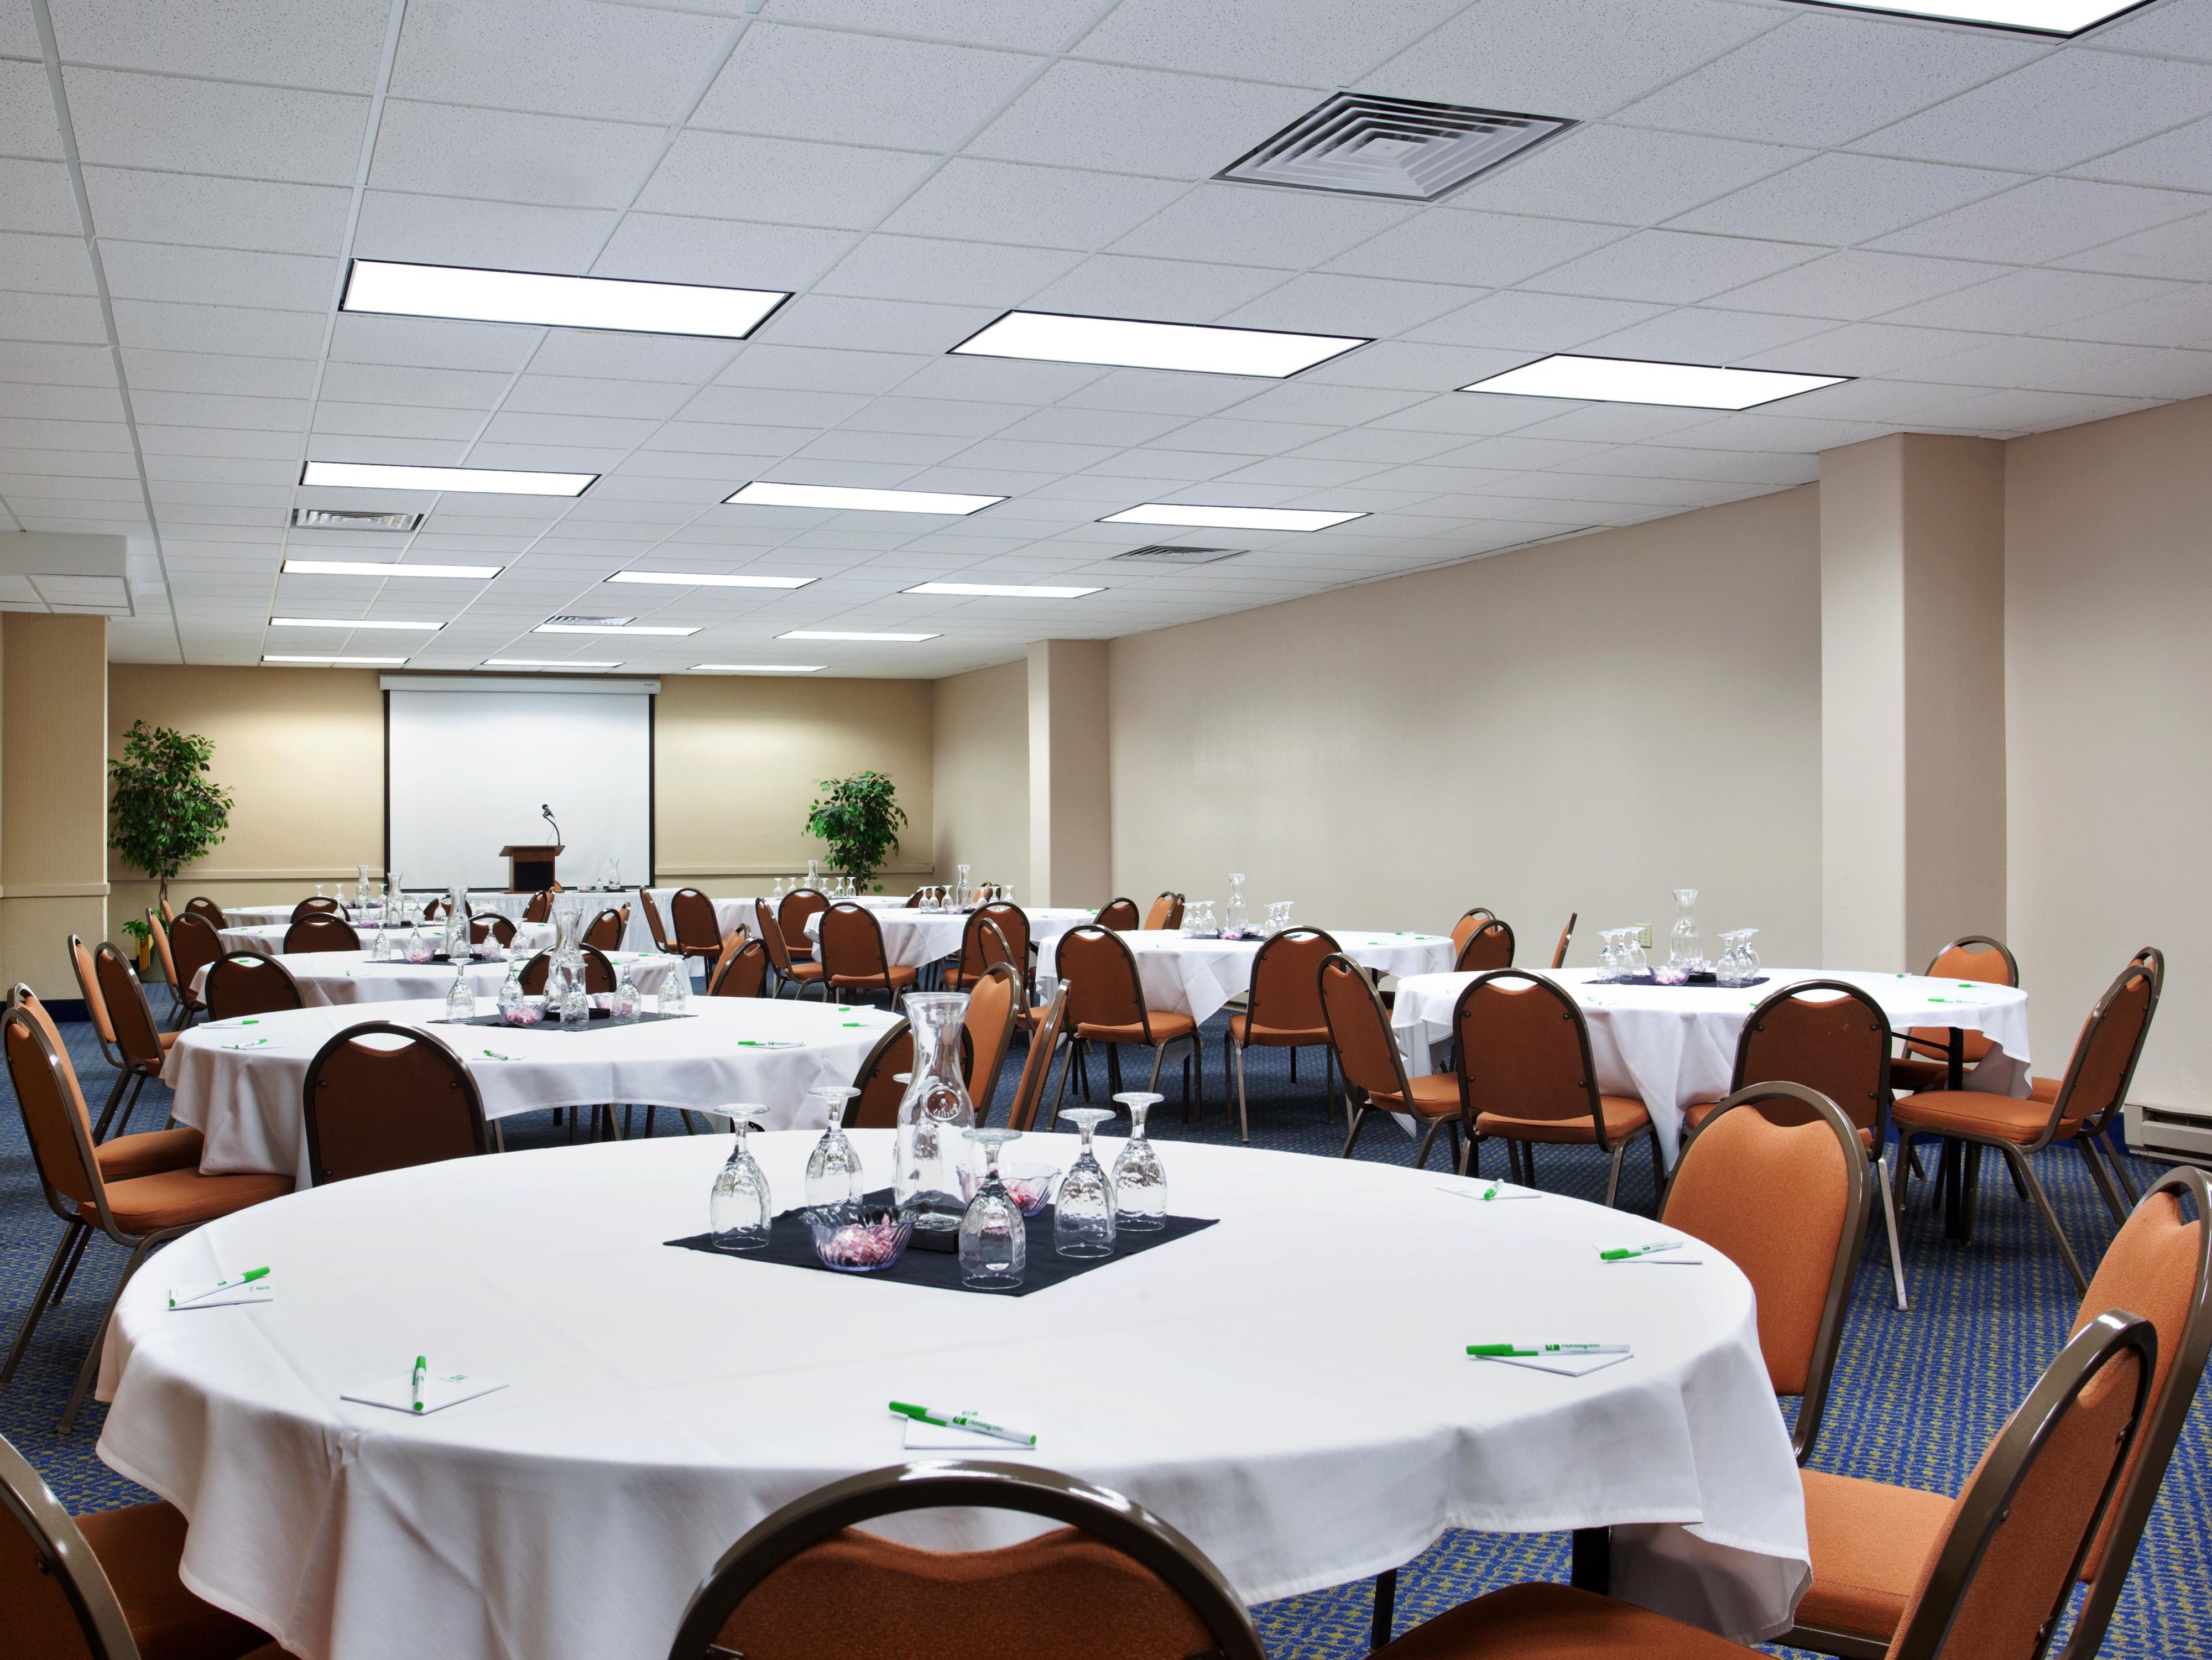 If you are looking for a place to hold your next meeting or gathering, we have several meeting rooms of various sizes available for a variety of events!  Click below to email our Groups and Meetings Manager, Danniela Solano.